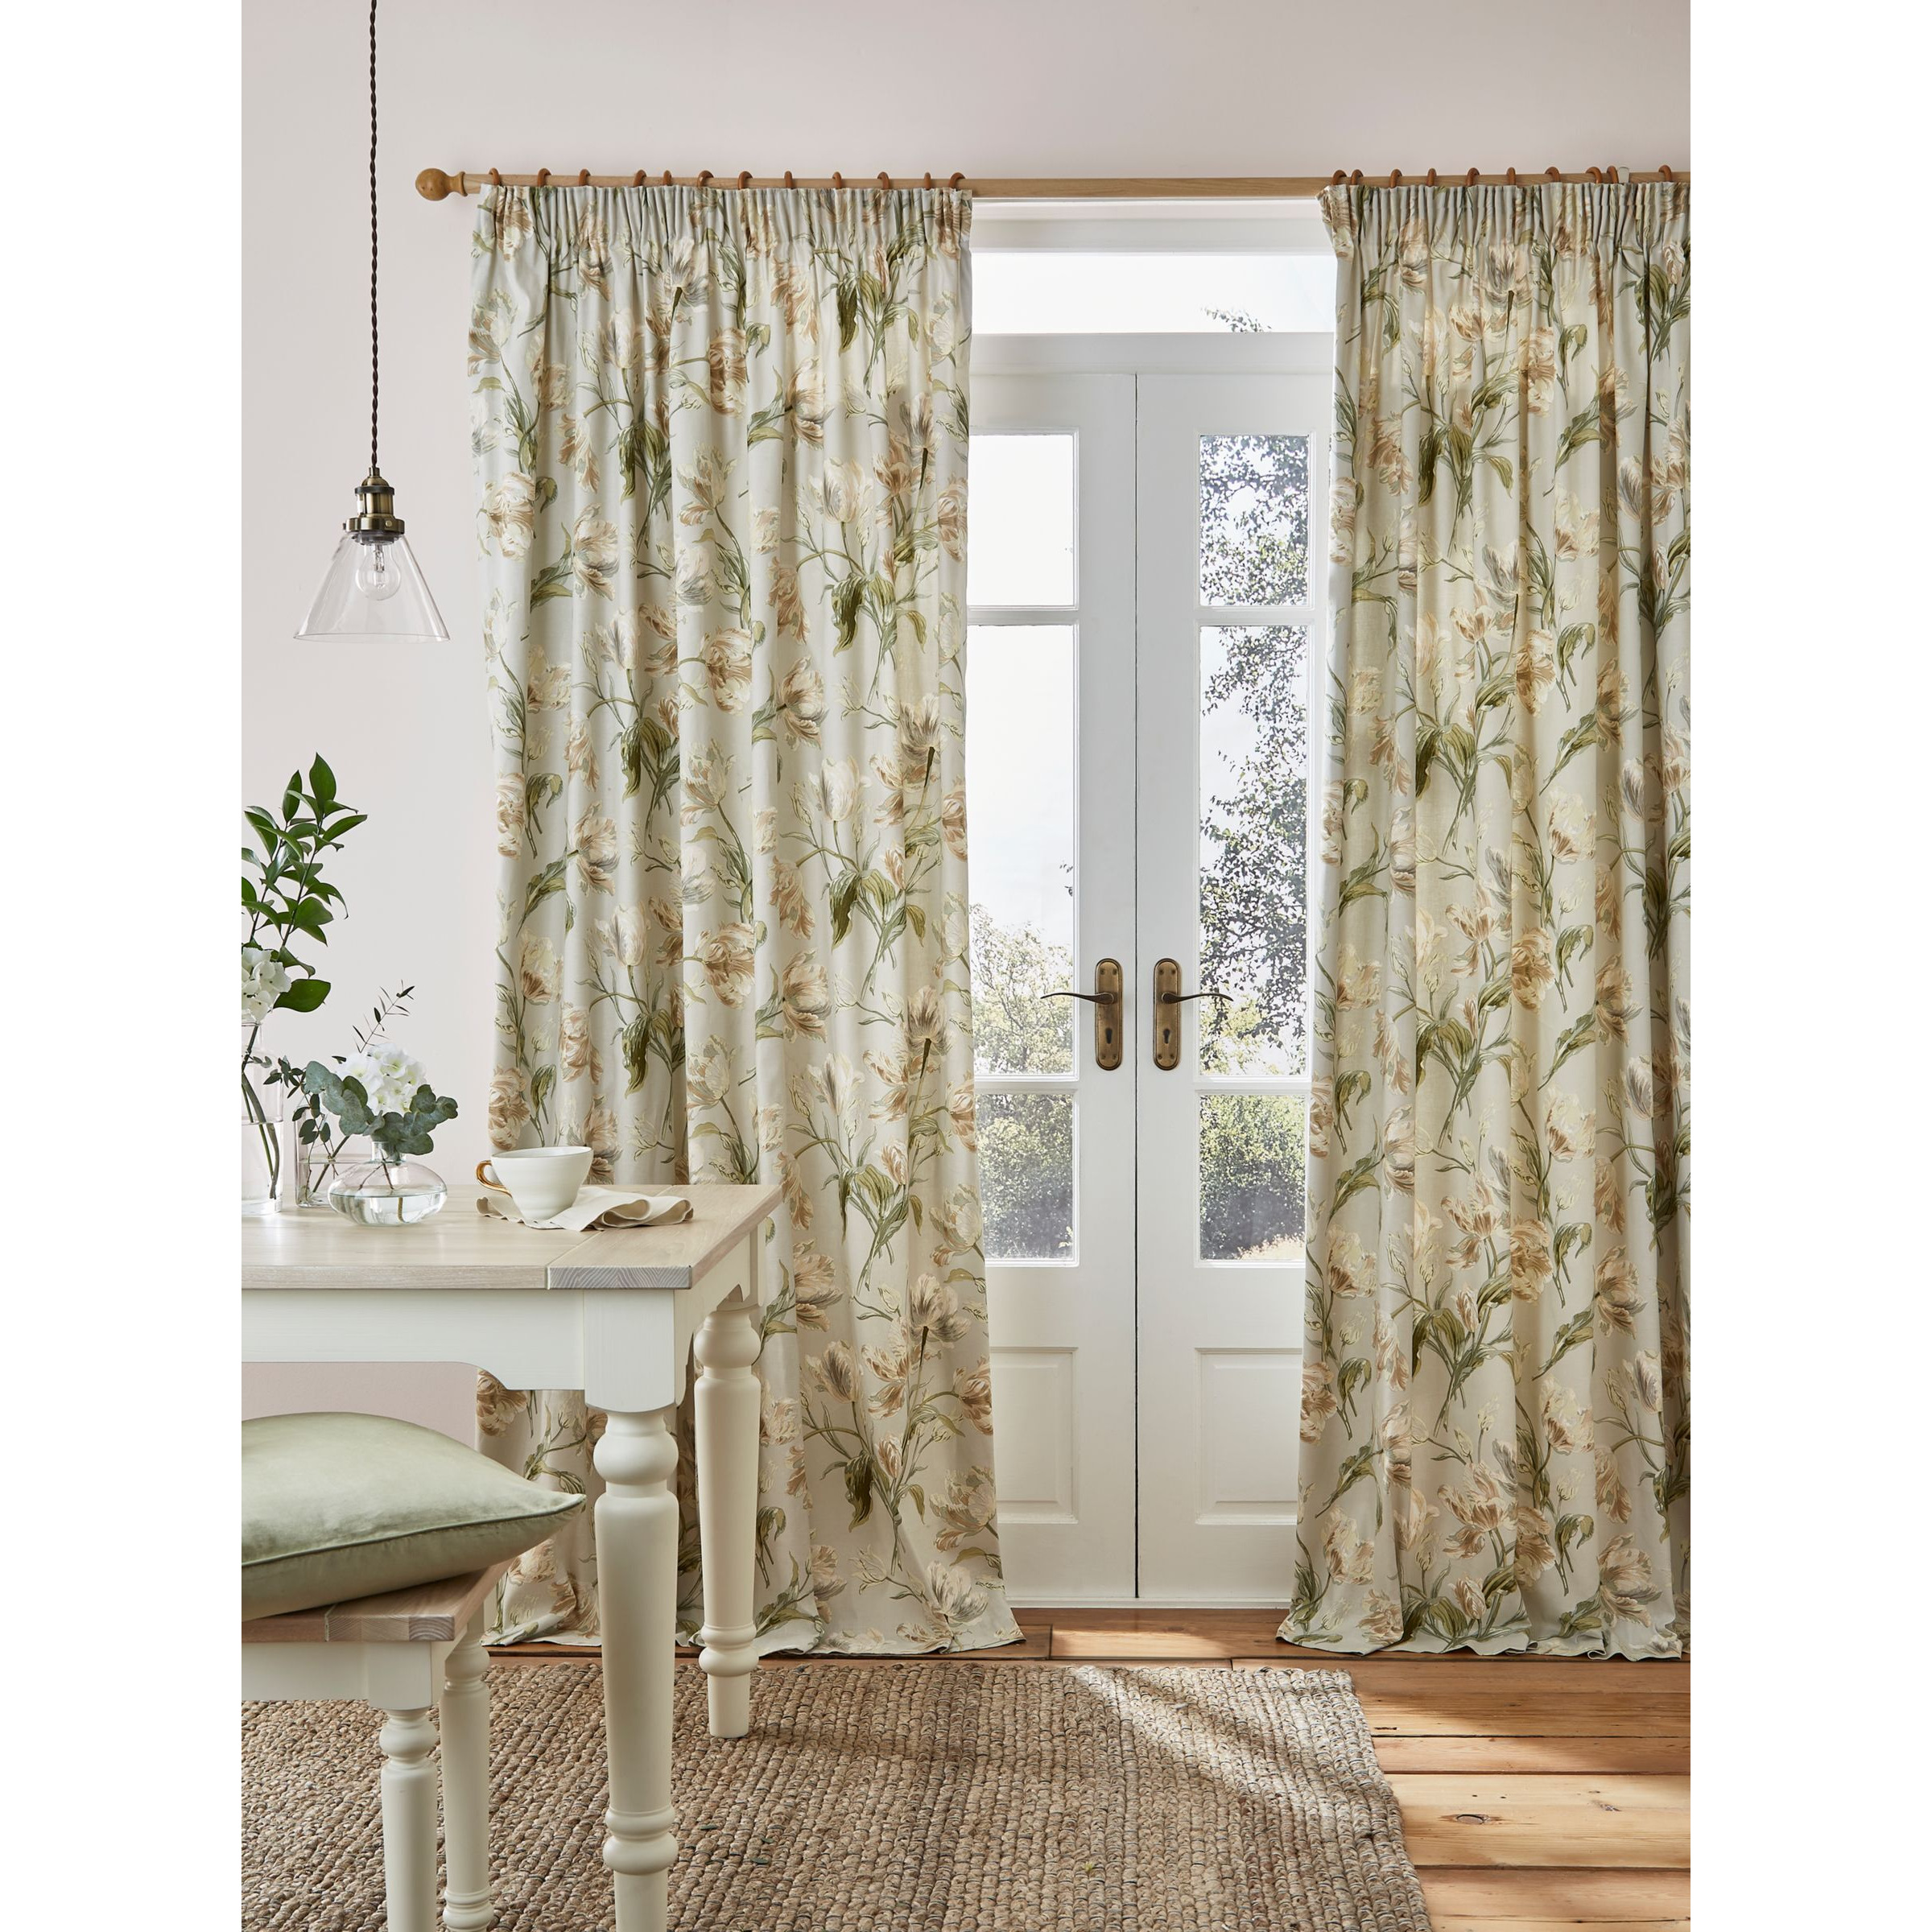 Laura Ashley Gosford Pair Lined Pencil Pleat Curtains - image 1